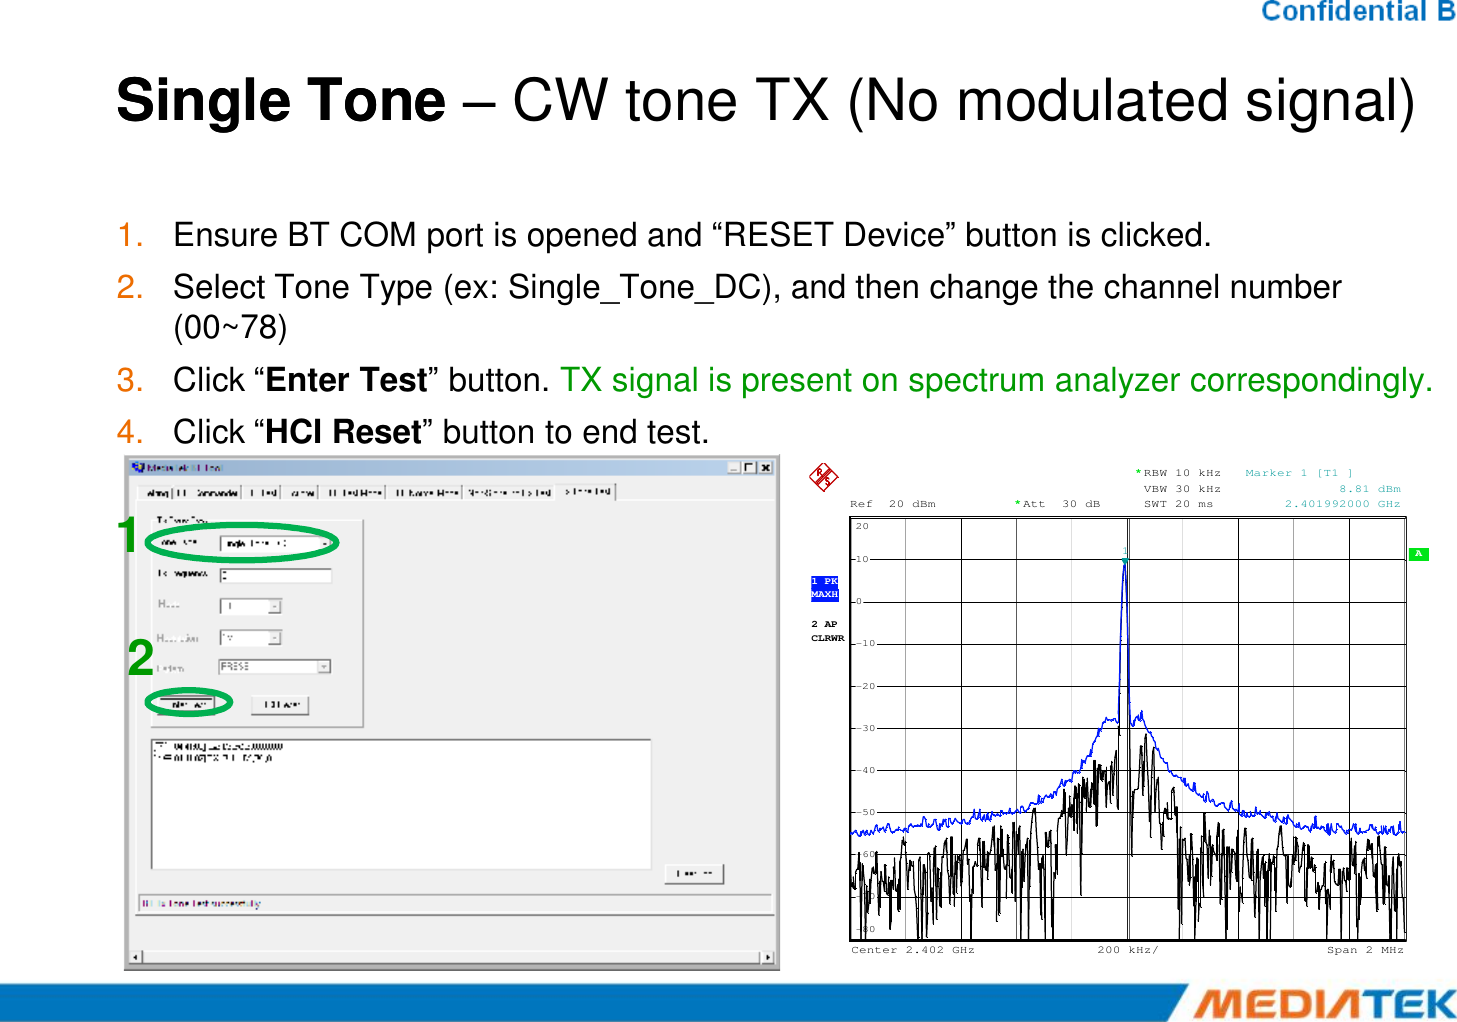 Single Tone Single Tone –– CW tone TX (No modulated signal)1. Ensure BT COM port is opened and “RESET Device” button is clicked.2. Select Tone Type (ex: Single_Tone_DC), and then change the channel number (00~78)3. Click “Enter Test” button. TX signal is present on spectrum analyzer correspondingly.4. Click “HCI Reset” button to end test.1Ref 20 dBmAtt 30 dB**RBW 10 kHzVBW 30 kHzSWT 20 ms20Marker 1 [T1 ]            8.81 dBm     2.401992000 GHz122 APCLRWR A 200 kHz/Center2.402 GHz Span2 MHz1 PKMAXH-80-70-60-50-40-30-20-10010201